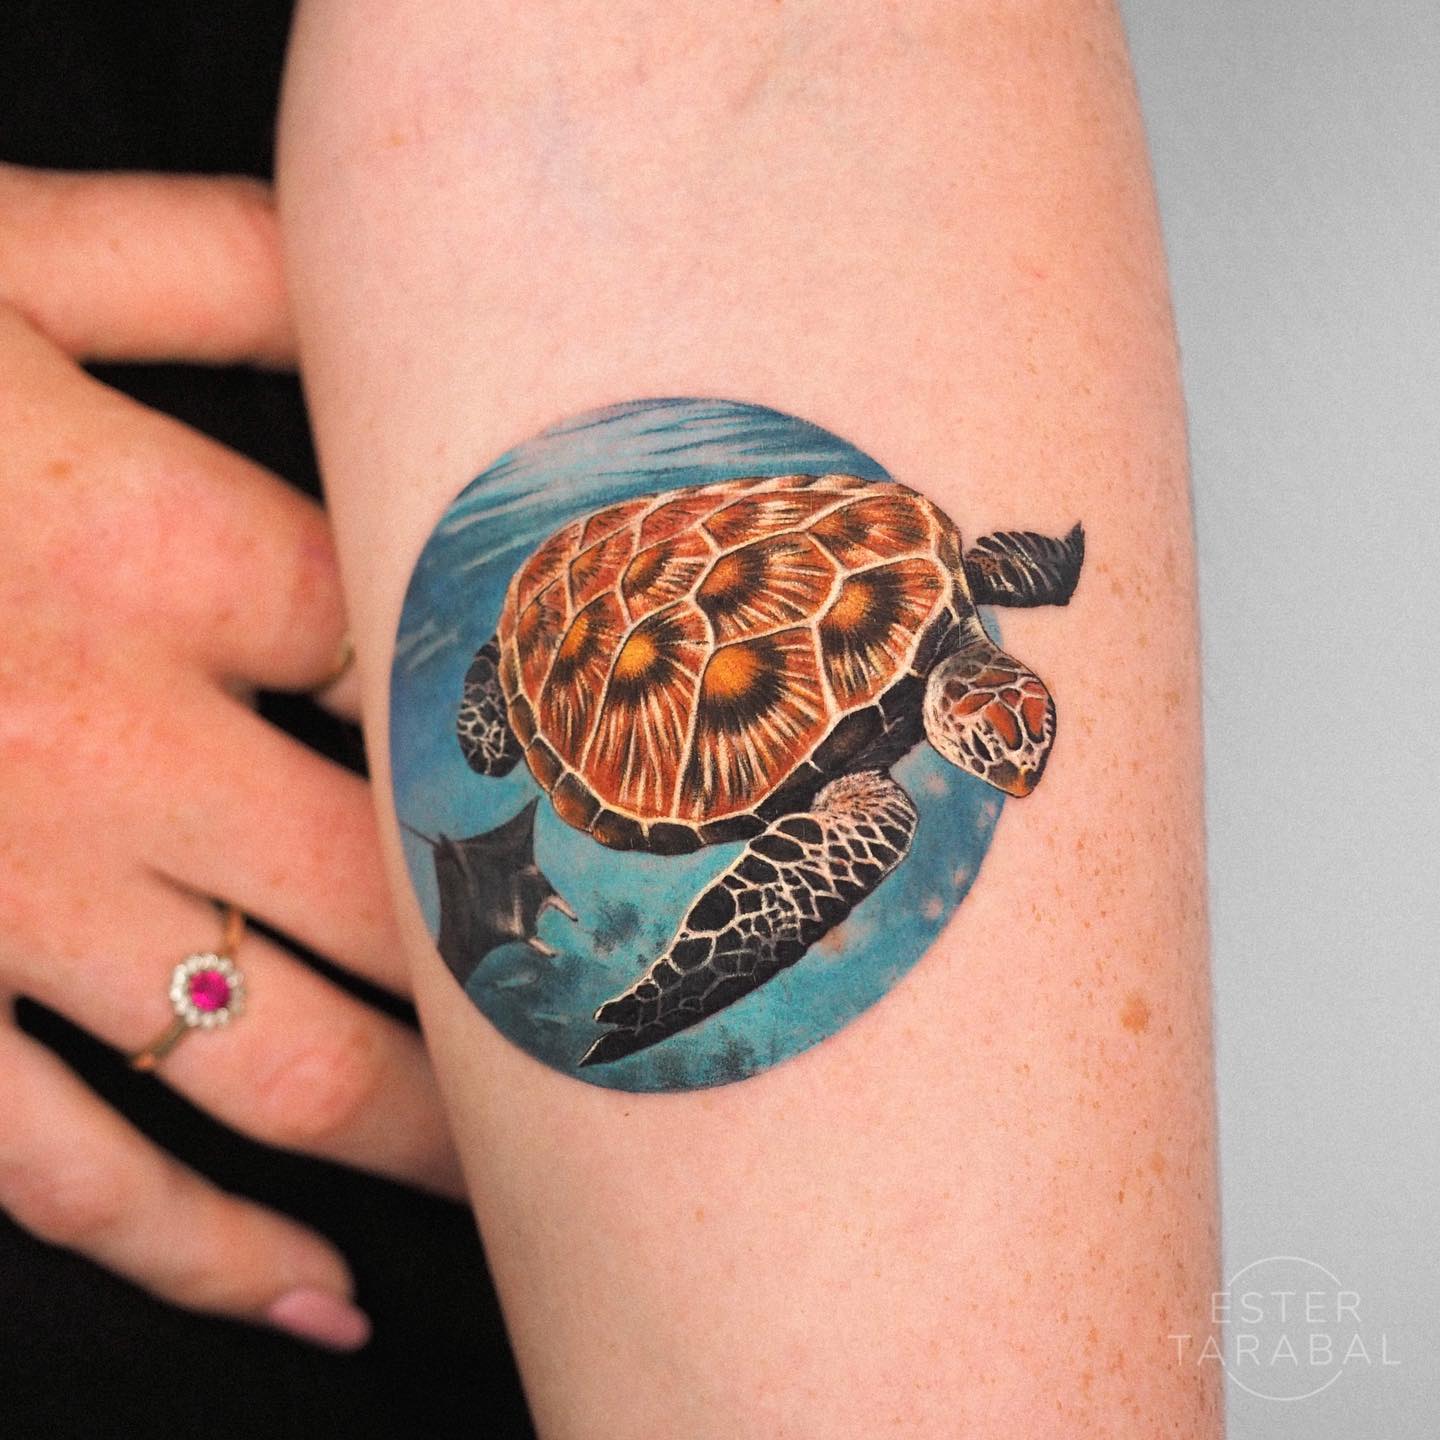 The sea turtle looks so realistic that it feels like it will come to life. The under the sea image is created with a circular tattoo in a great way. By the way, can you spot the stingray fish behind the sea turtle? You should get these beautiful creatures inked on your body.